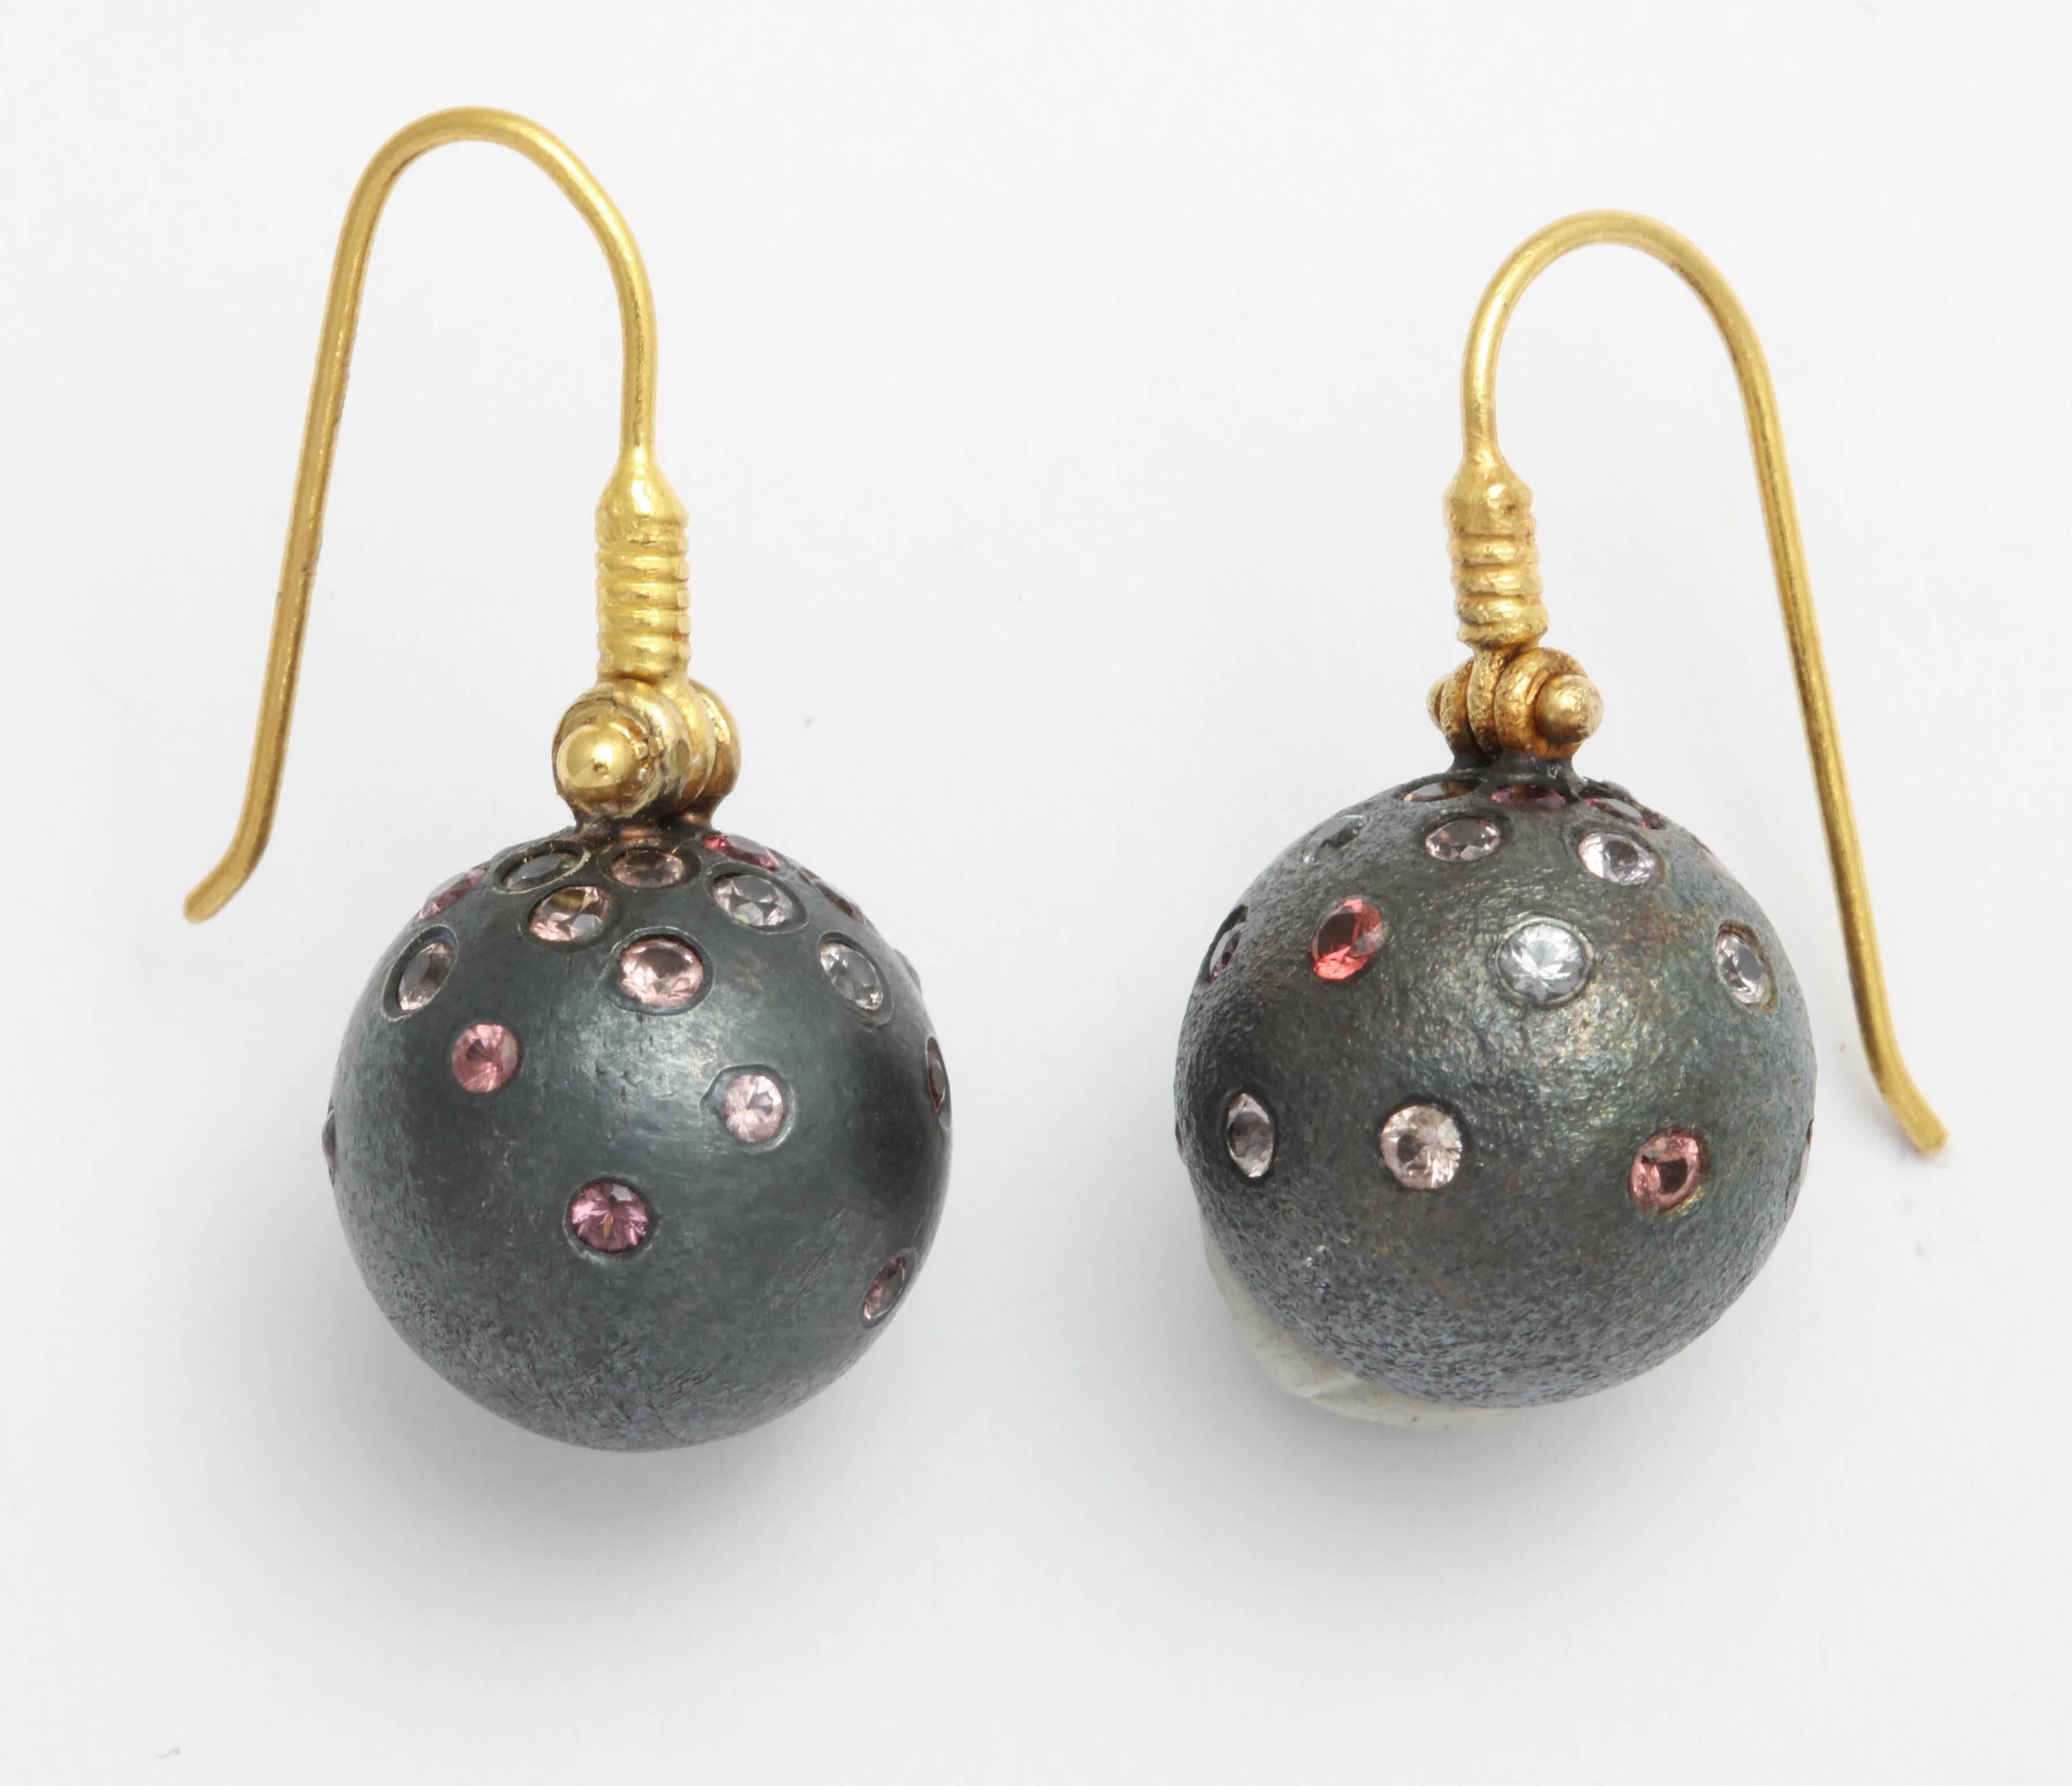 A pair of rhodium plated sterling silver ball earrings set with multi colored spinel The balls are suspended from 18kt yellow gold ear wires with hinges.
There are approximately 2.08cts of spinel
Length: 1.10 inches
Width: .60 inch